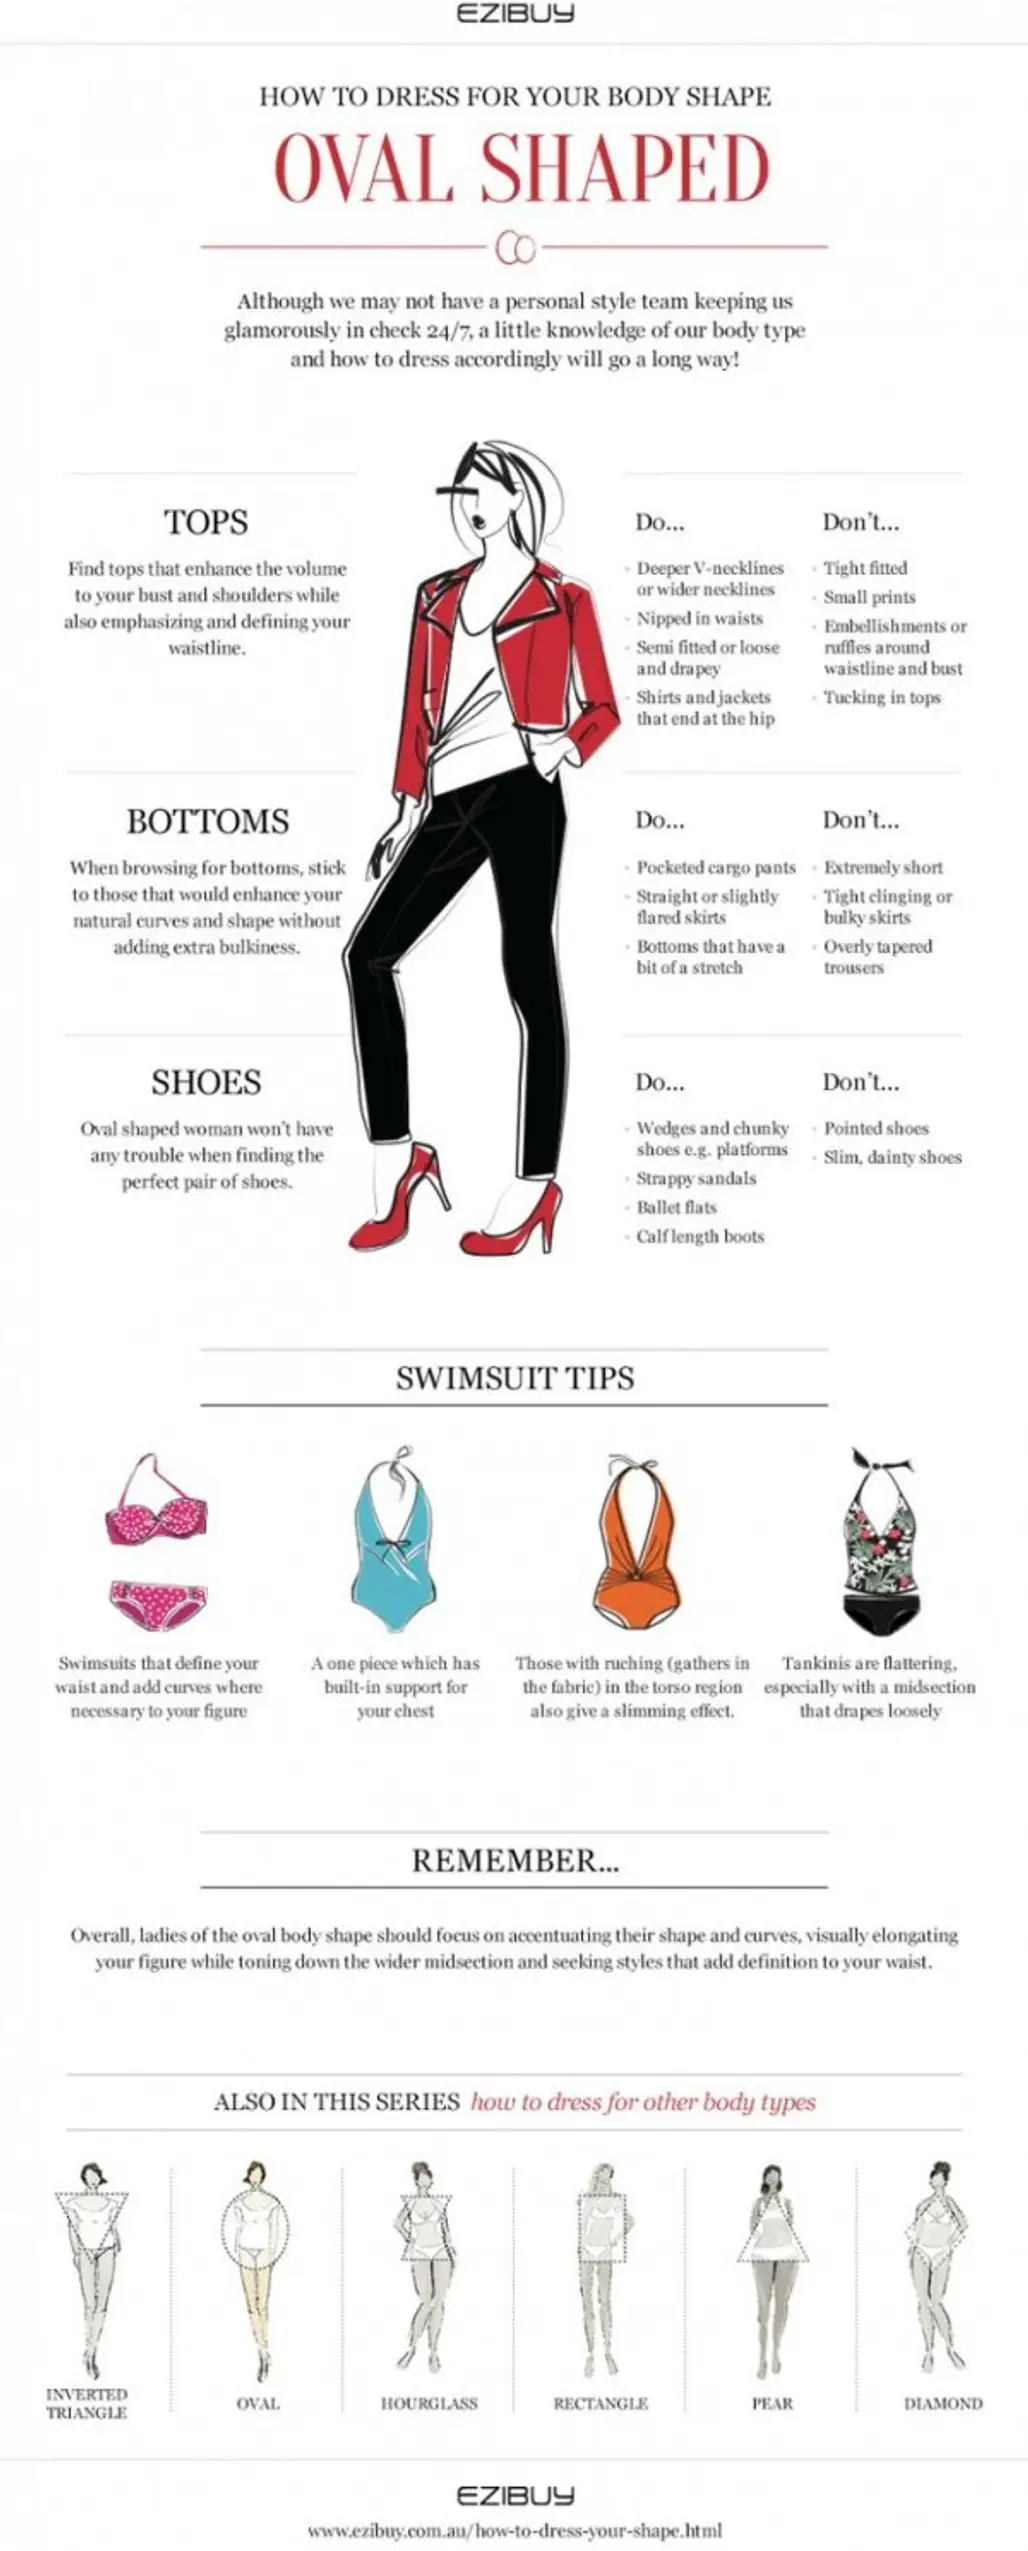 How to Dress for Your Body Shape - Oval